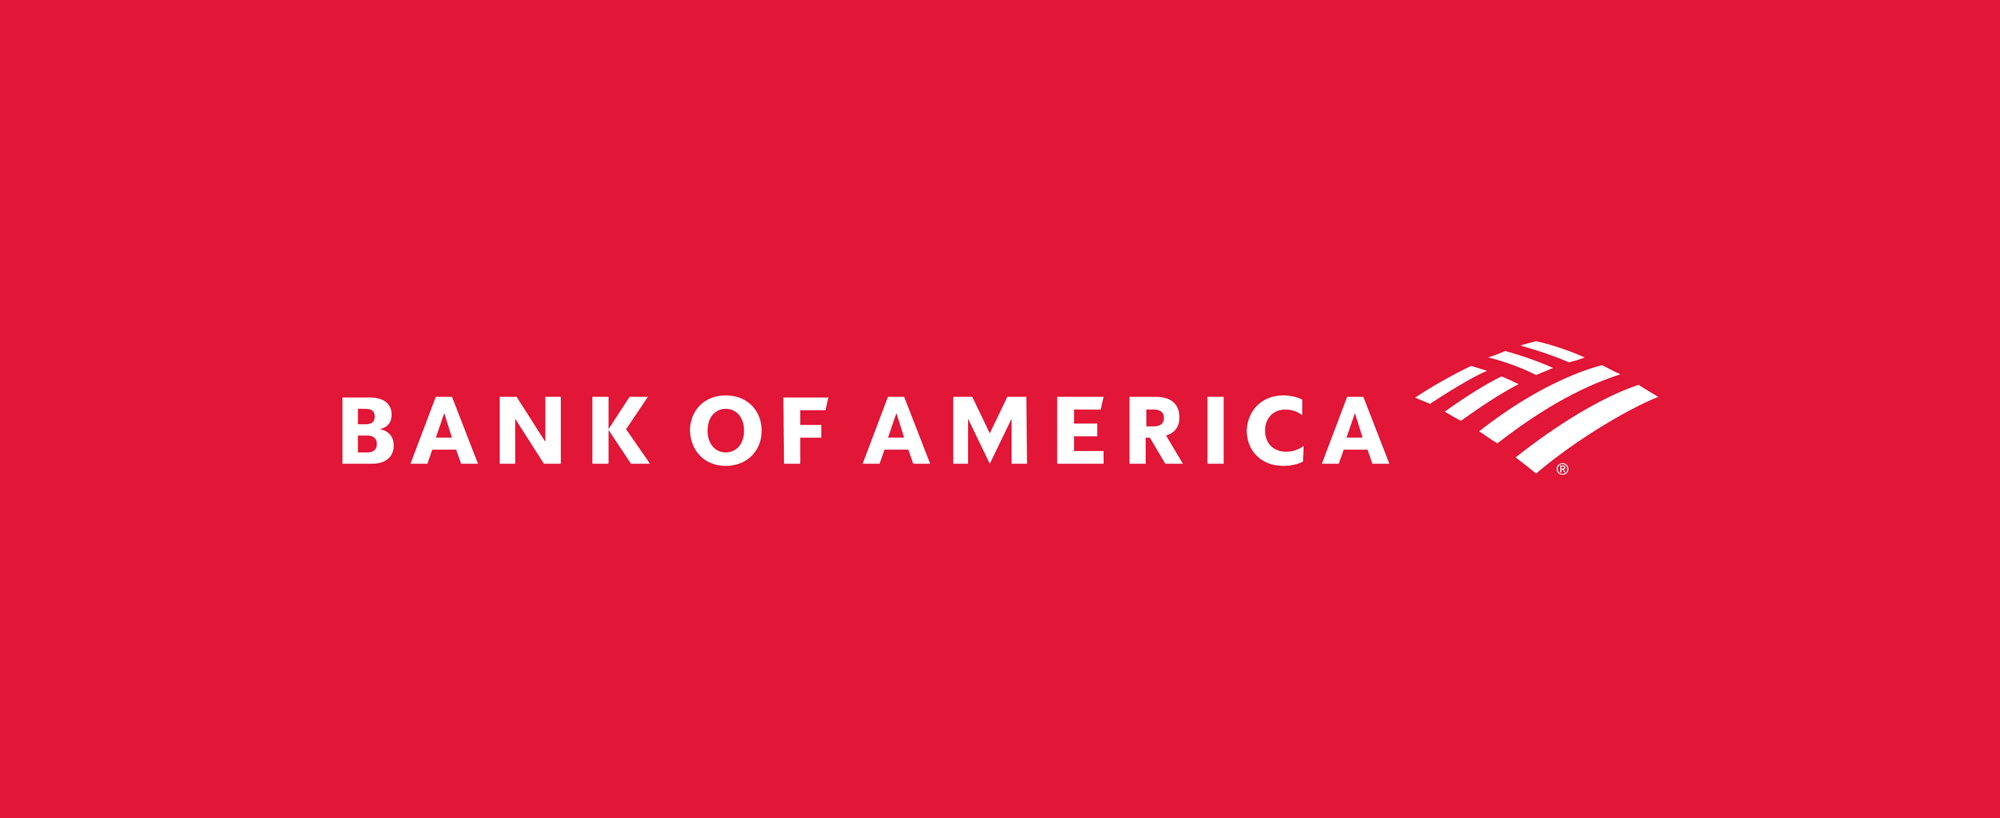 Bank of America Logo Red Background PNG HD Image pngteam.com